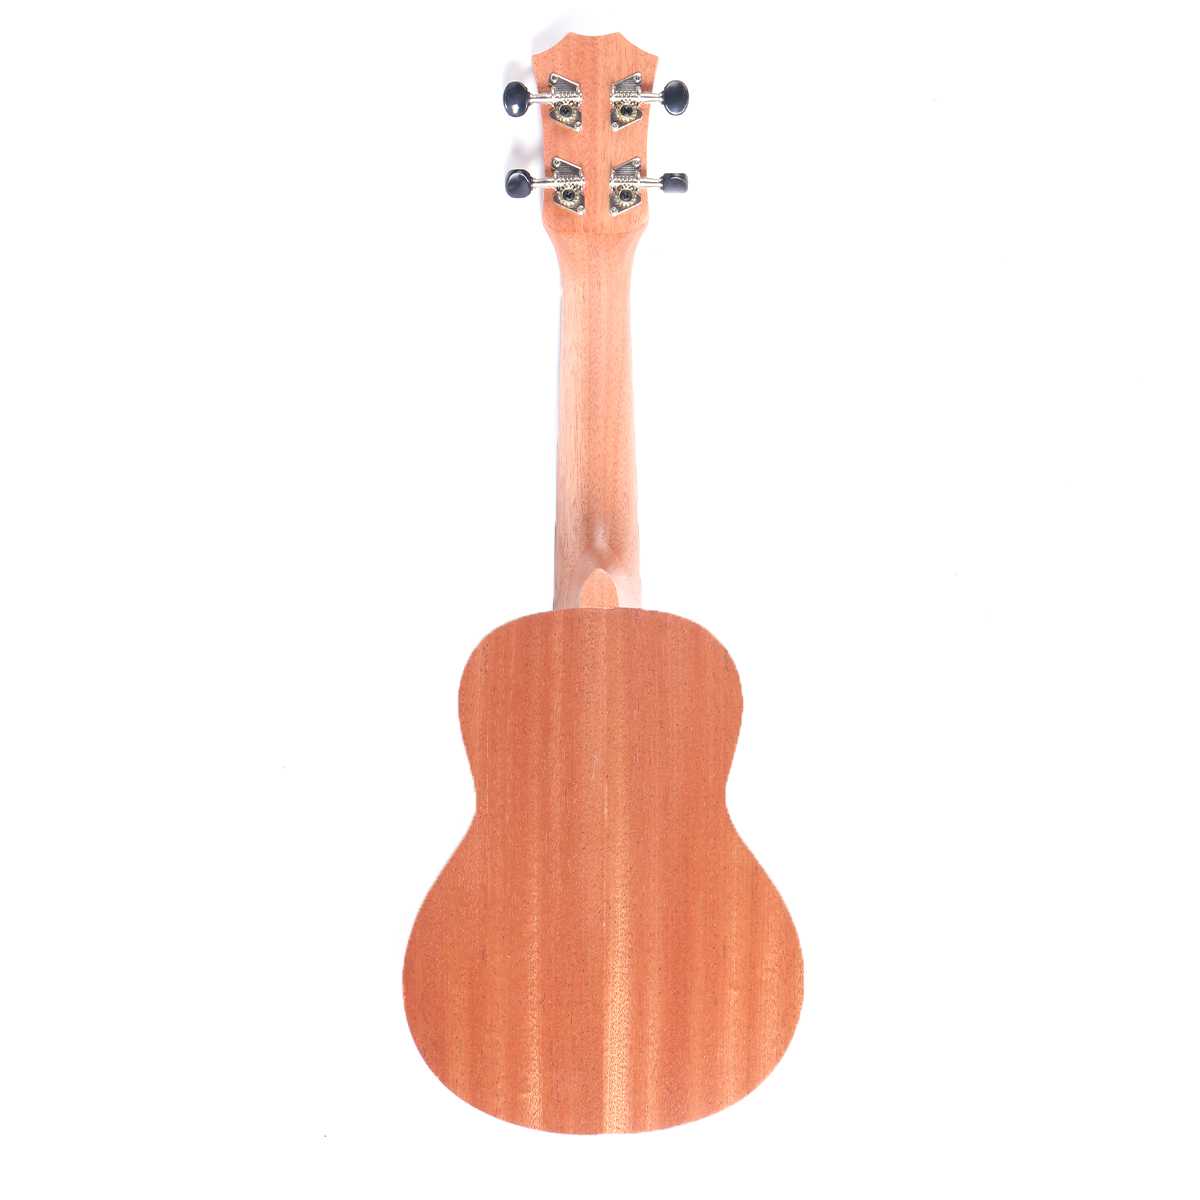 21-Inch-4-Strings-15-Frets-Wood-Color-Mahogany-Ukulele-Musical-Instrument-With-Guitar-picksRope-1510274